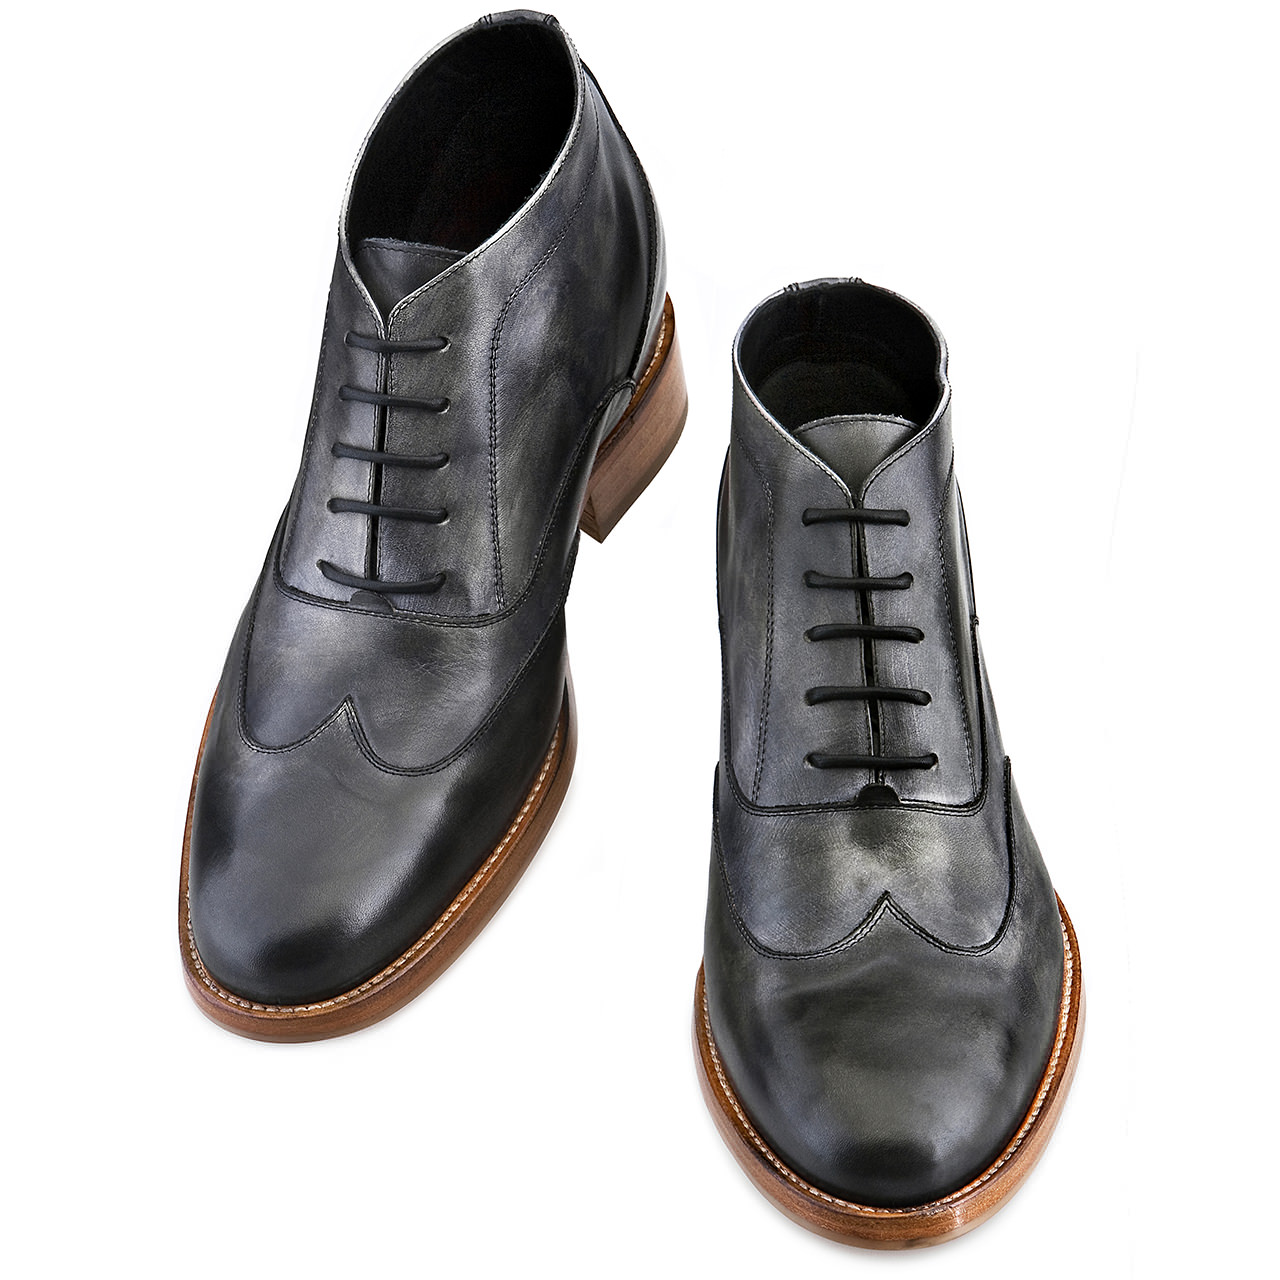 Memphis Tall men boots | Guidomaggi luxury elevator shoes